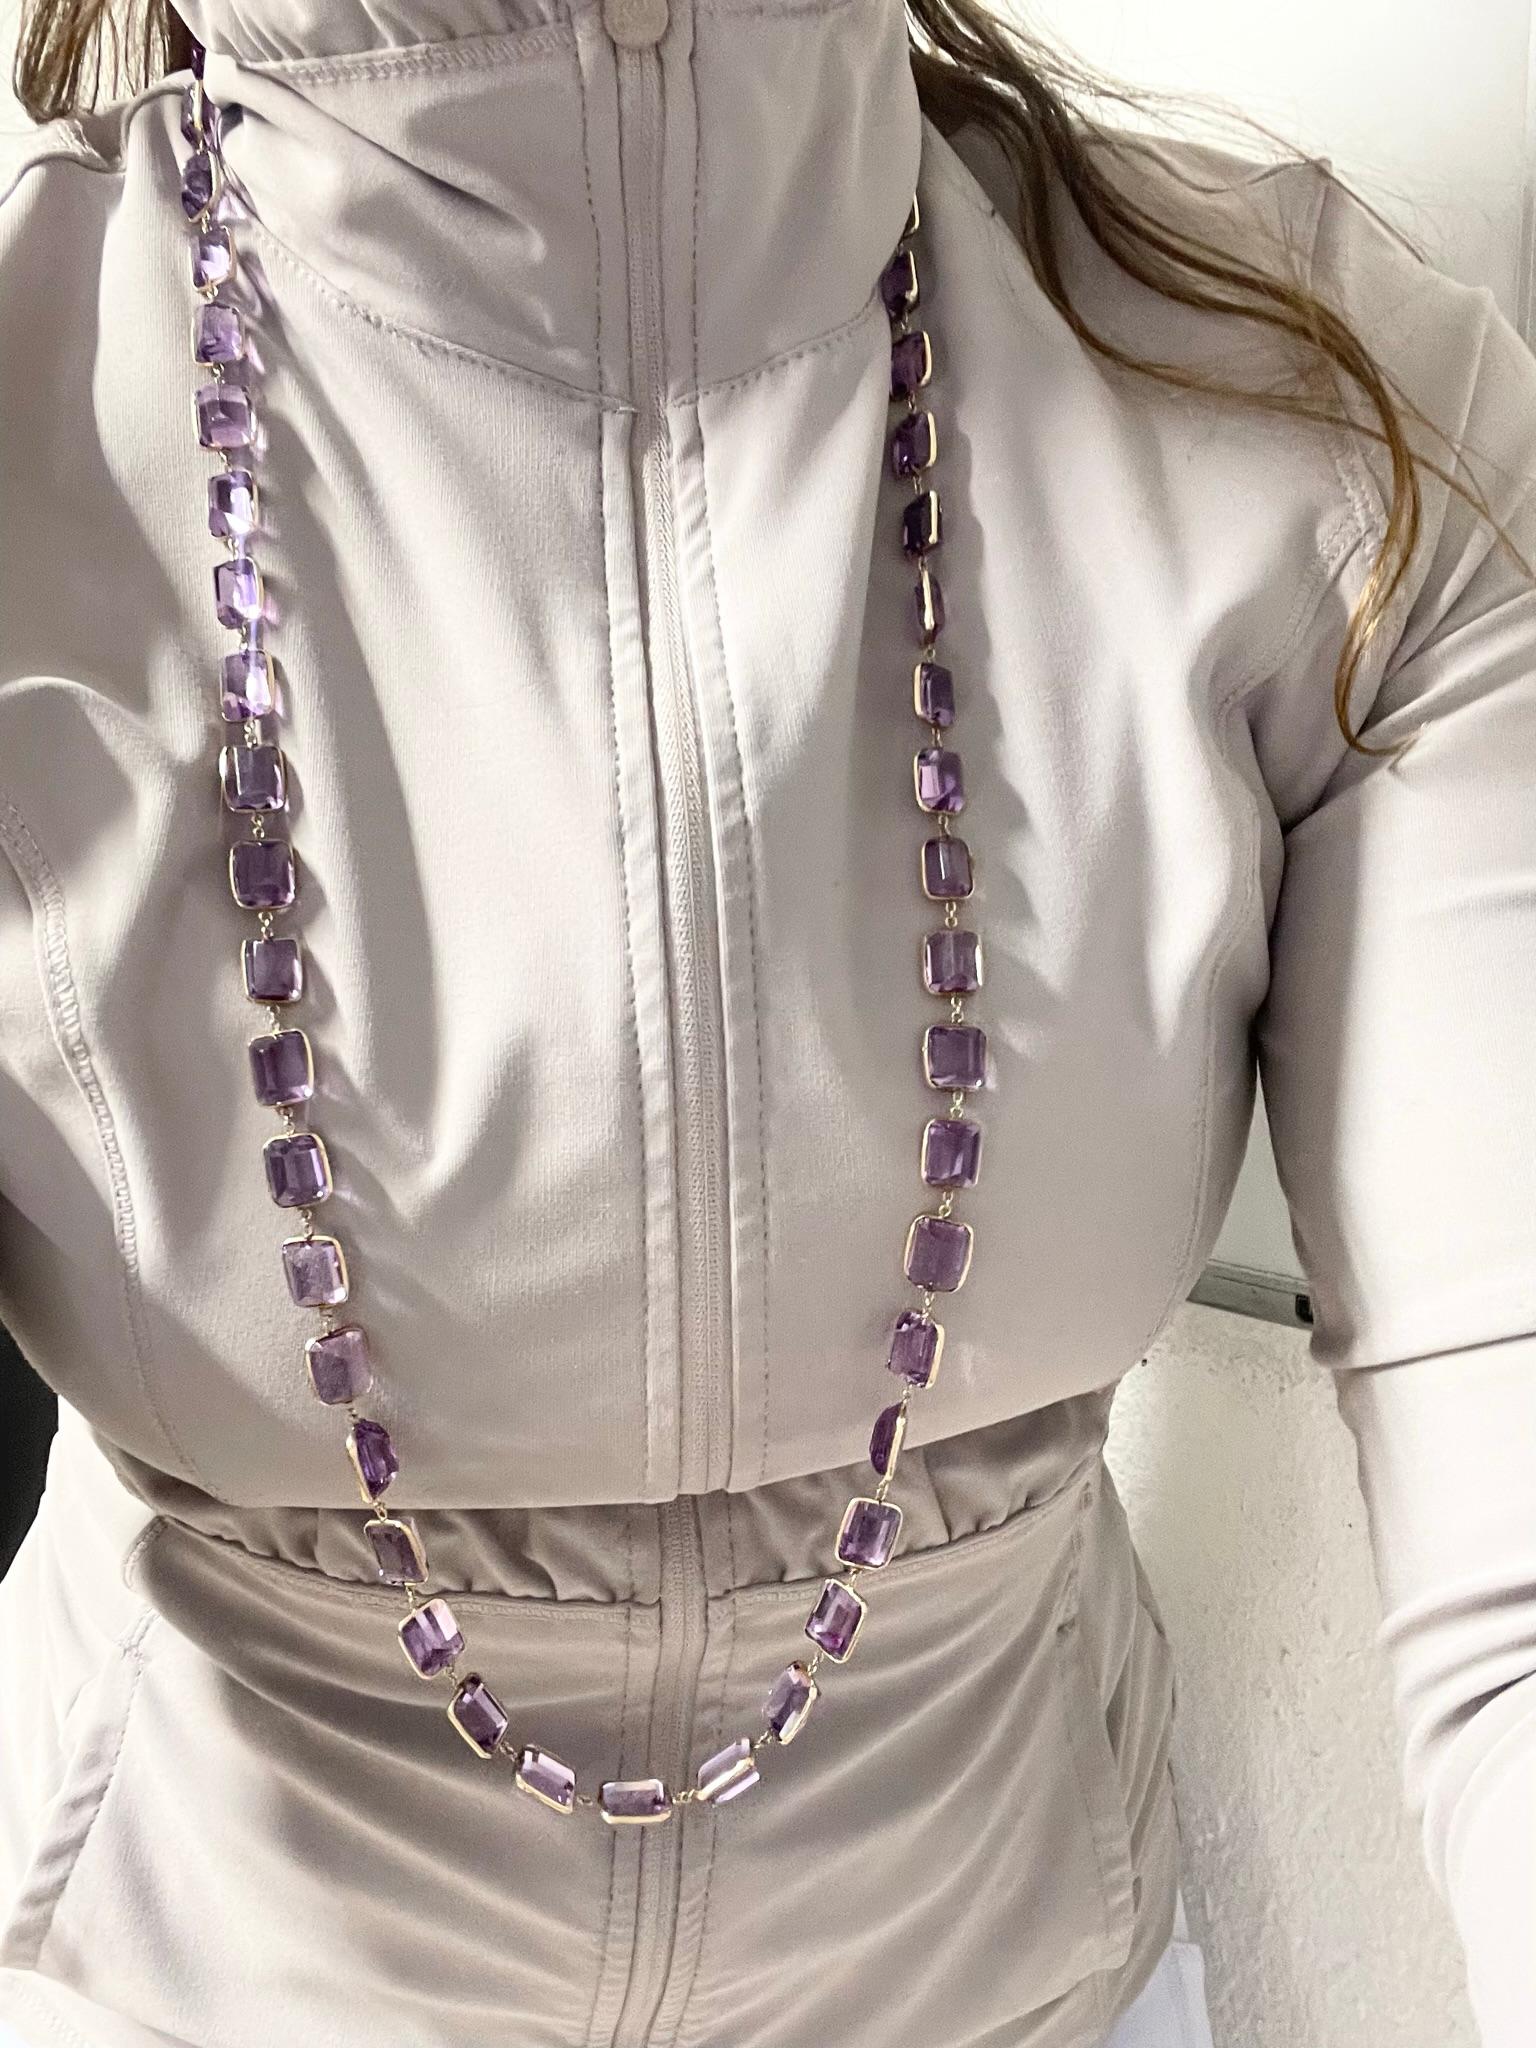 Rare yard necklace made with 300 carats of amethyst gemstones. The necklace is made in 14KT yellow gold and can be worn mutliple ways.

CENTER STONE: NATURAL AMETHYST(S)
CARAT: 300.00 carats
CLARITY: Very Slightly Included
COLOR: Purple
CUT: